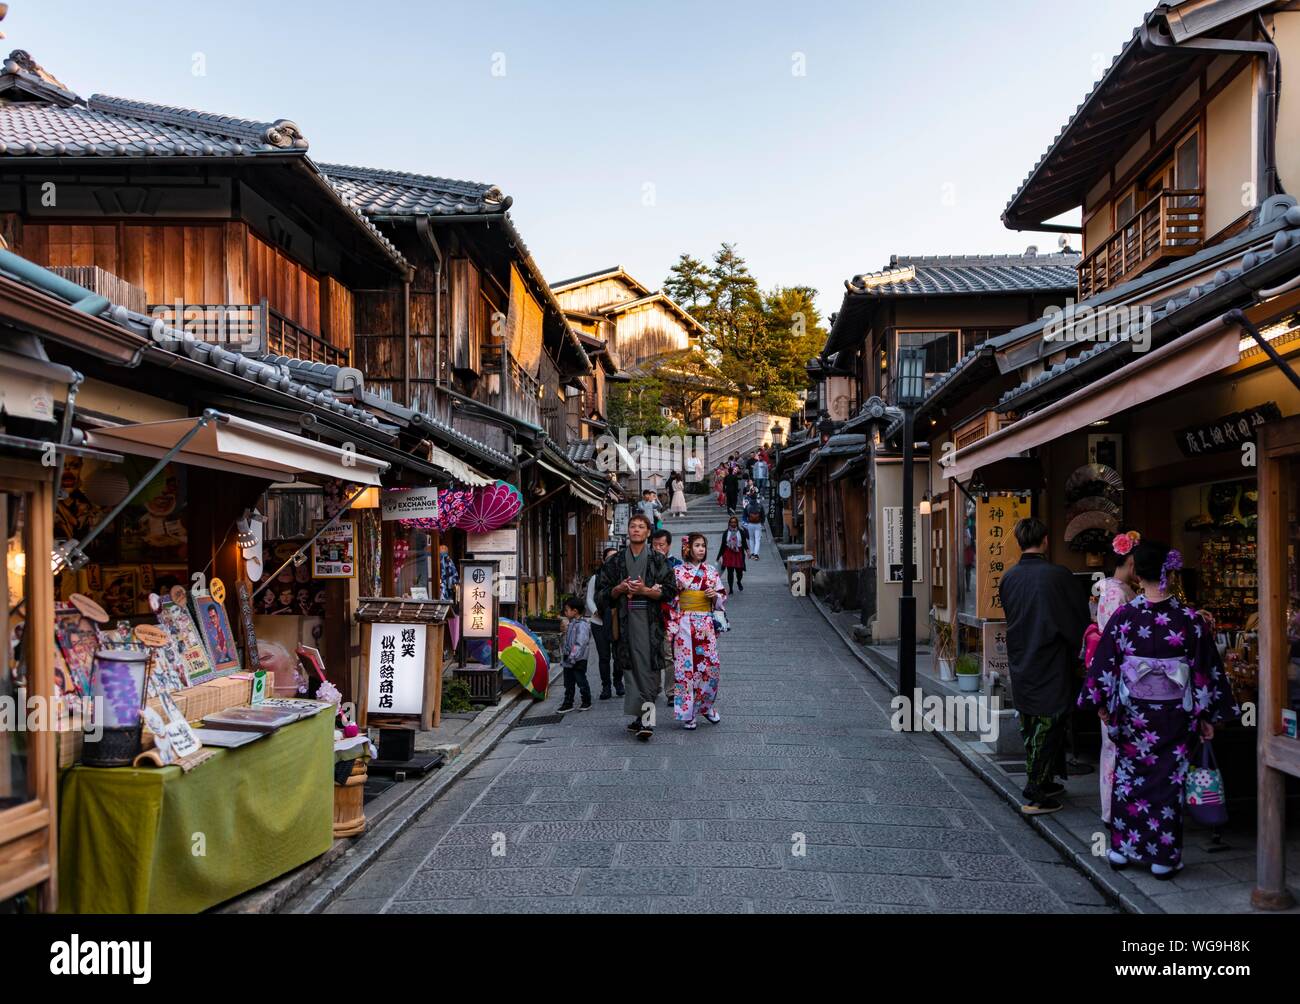 Pedestrians in an alleyway, Matsubara dori historical alleyway in the Old Town with traditional Japanese houses, Kiyomizu, Kyoto, Japan Stock Photo